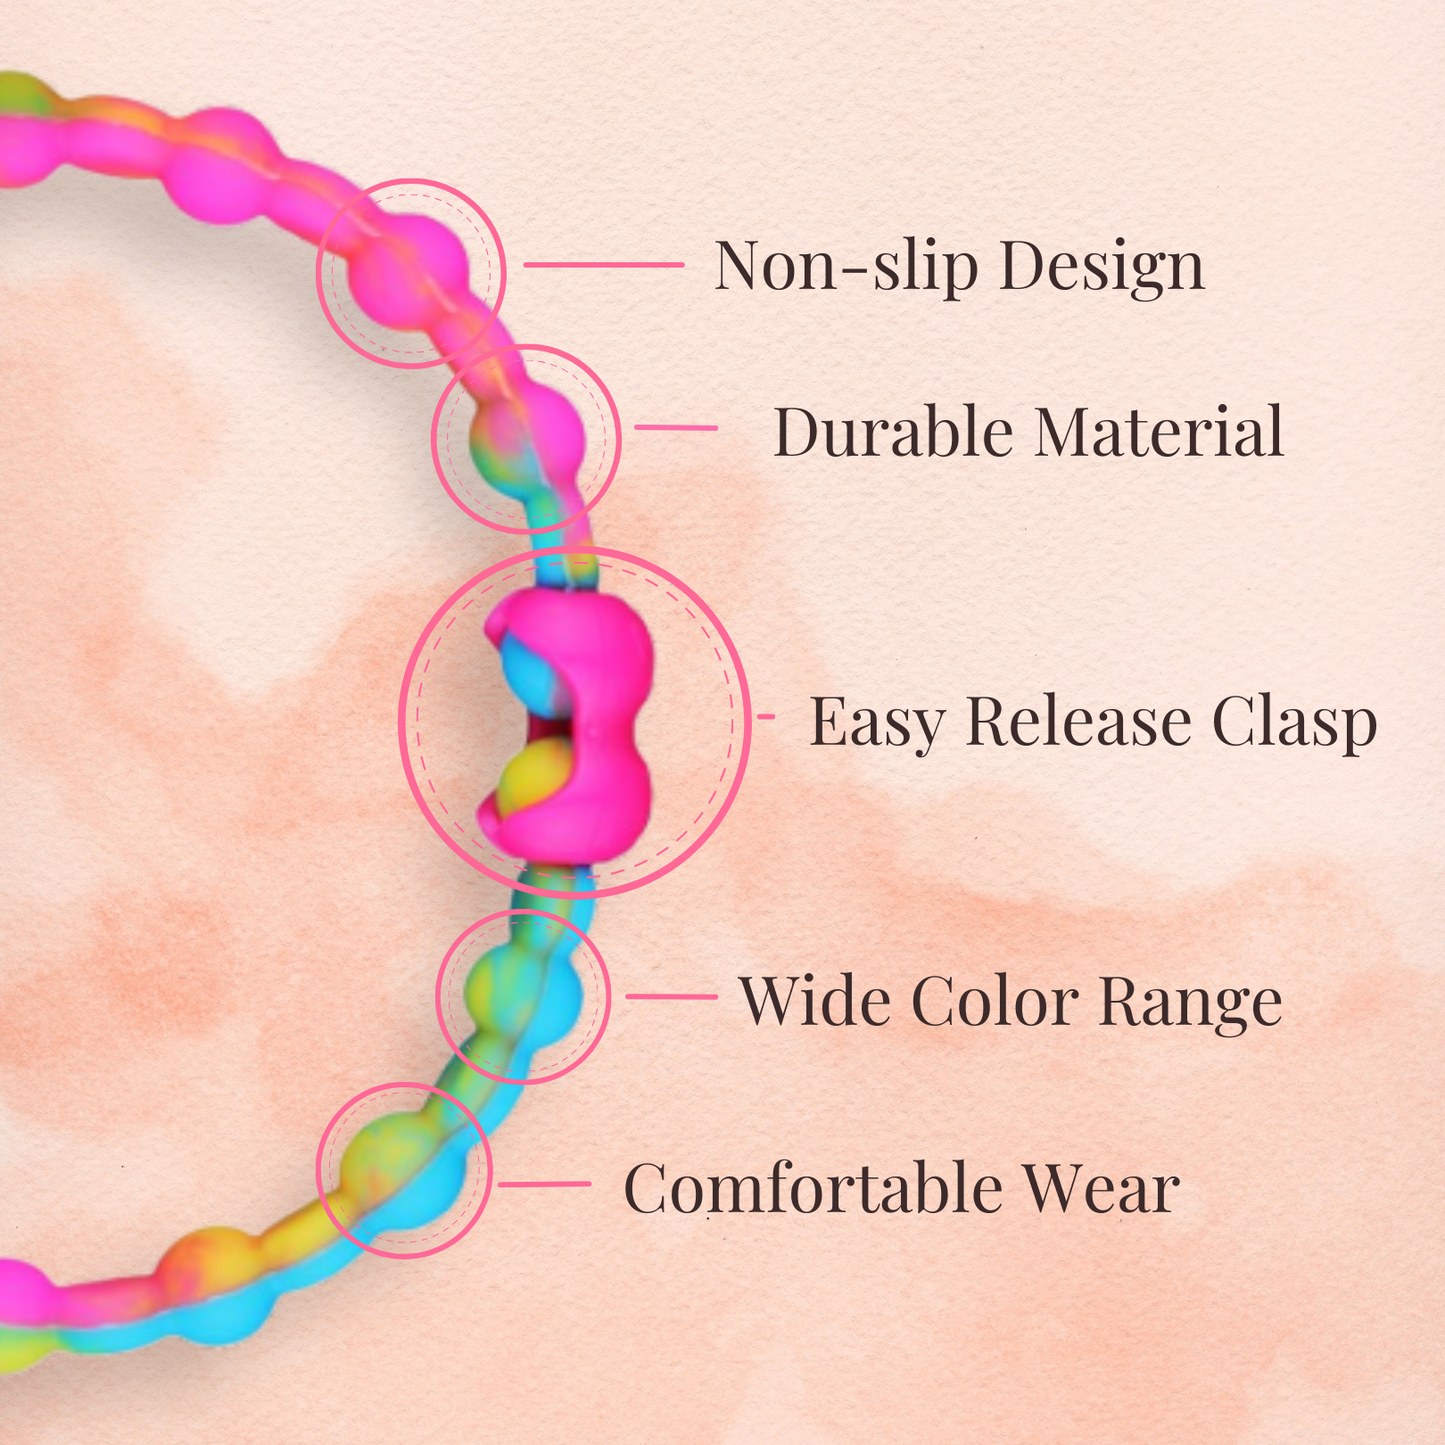 Icy Elegance Pack PRO Hair Ties (6-Pack): Cool Sophistication for Every Style